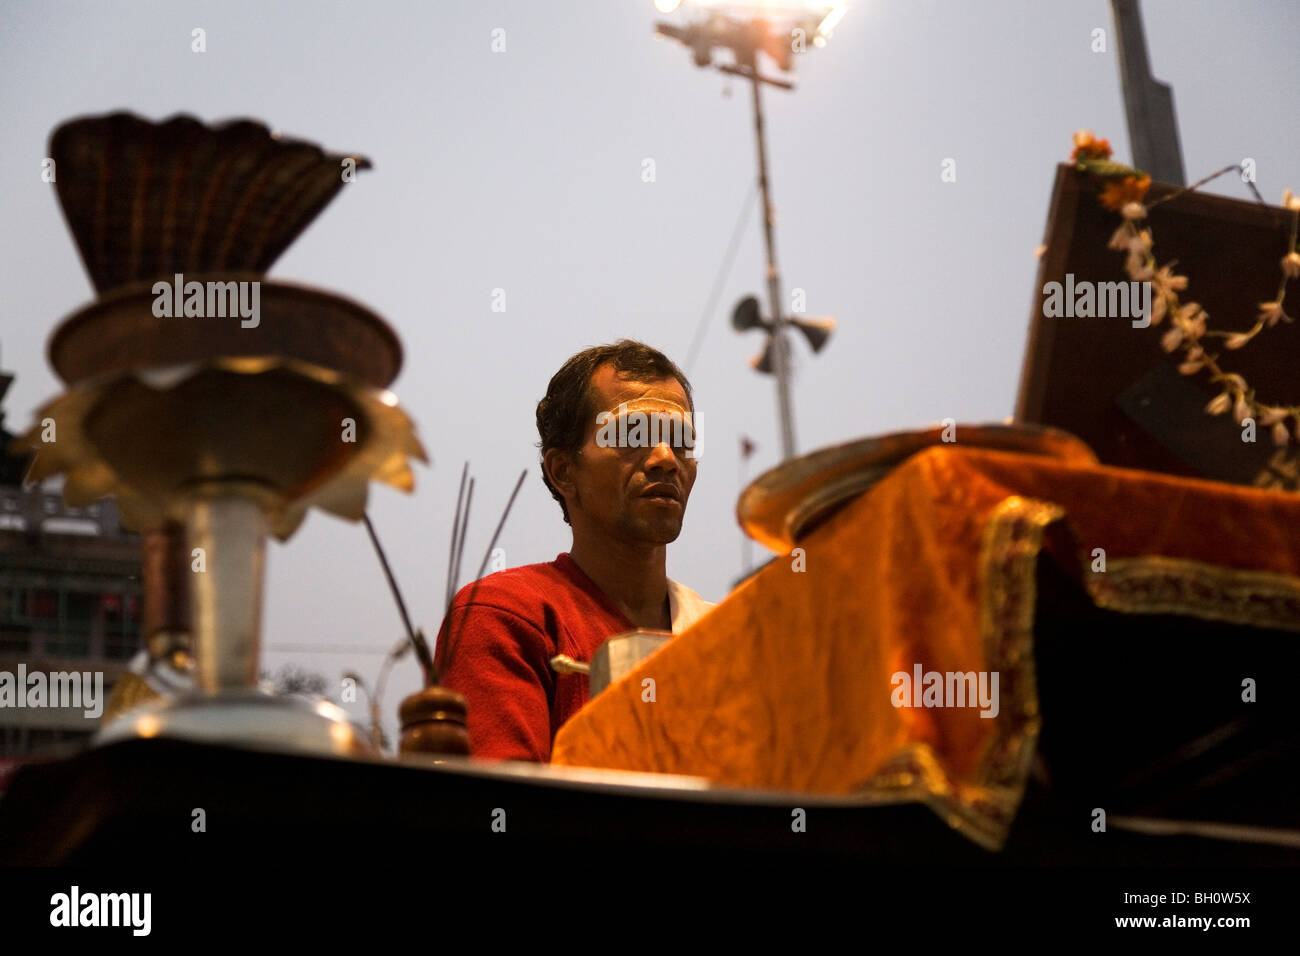 A Hindu priest conducts the daily Ganga Aarthi ritual by the banks of the River Ganga (Ganges) in the city of Varanasi, India. Stock Photo